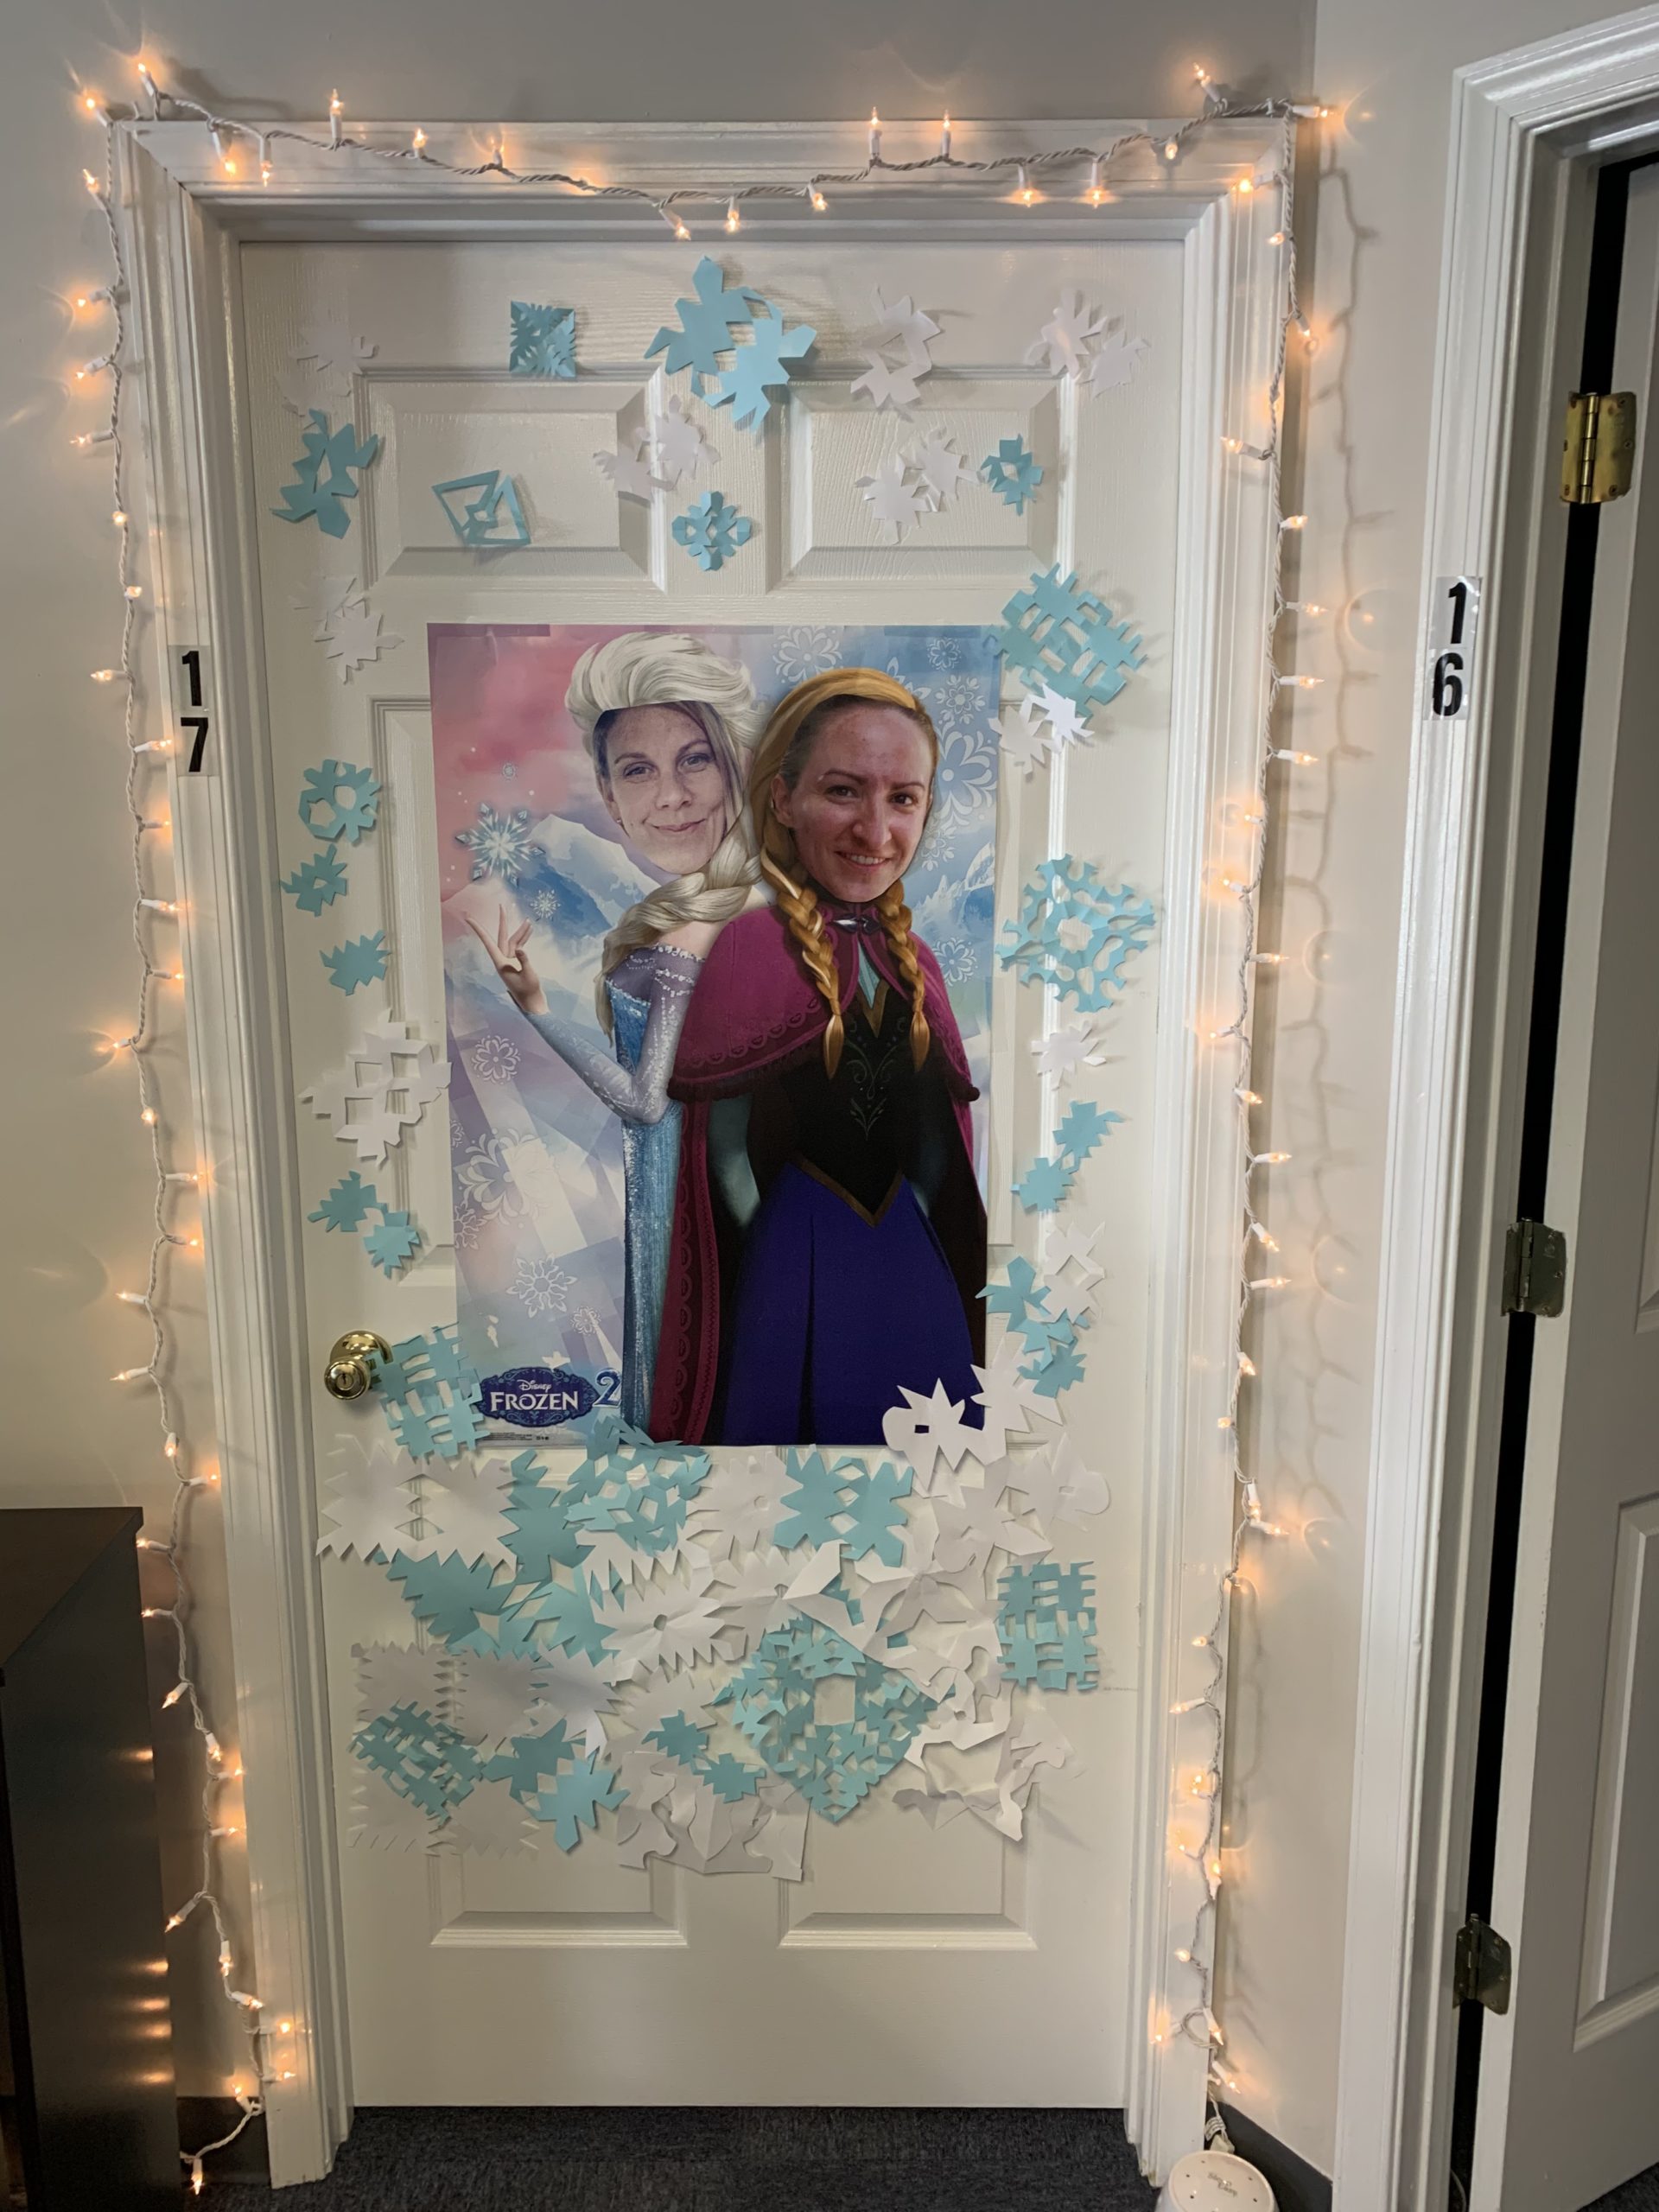 Honorable Mention - Funniest, Most Clever - Door Decoration